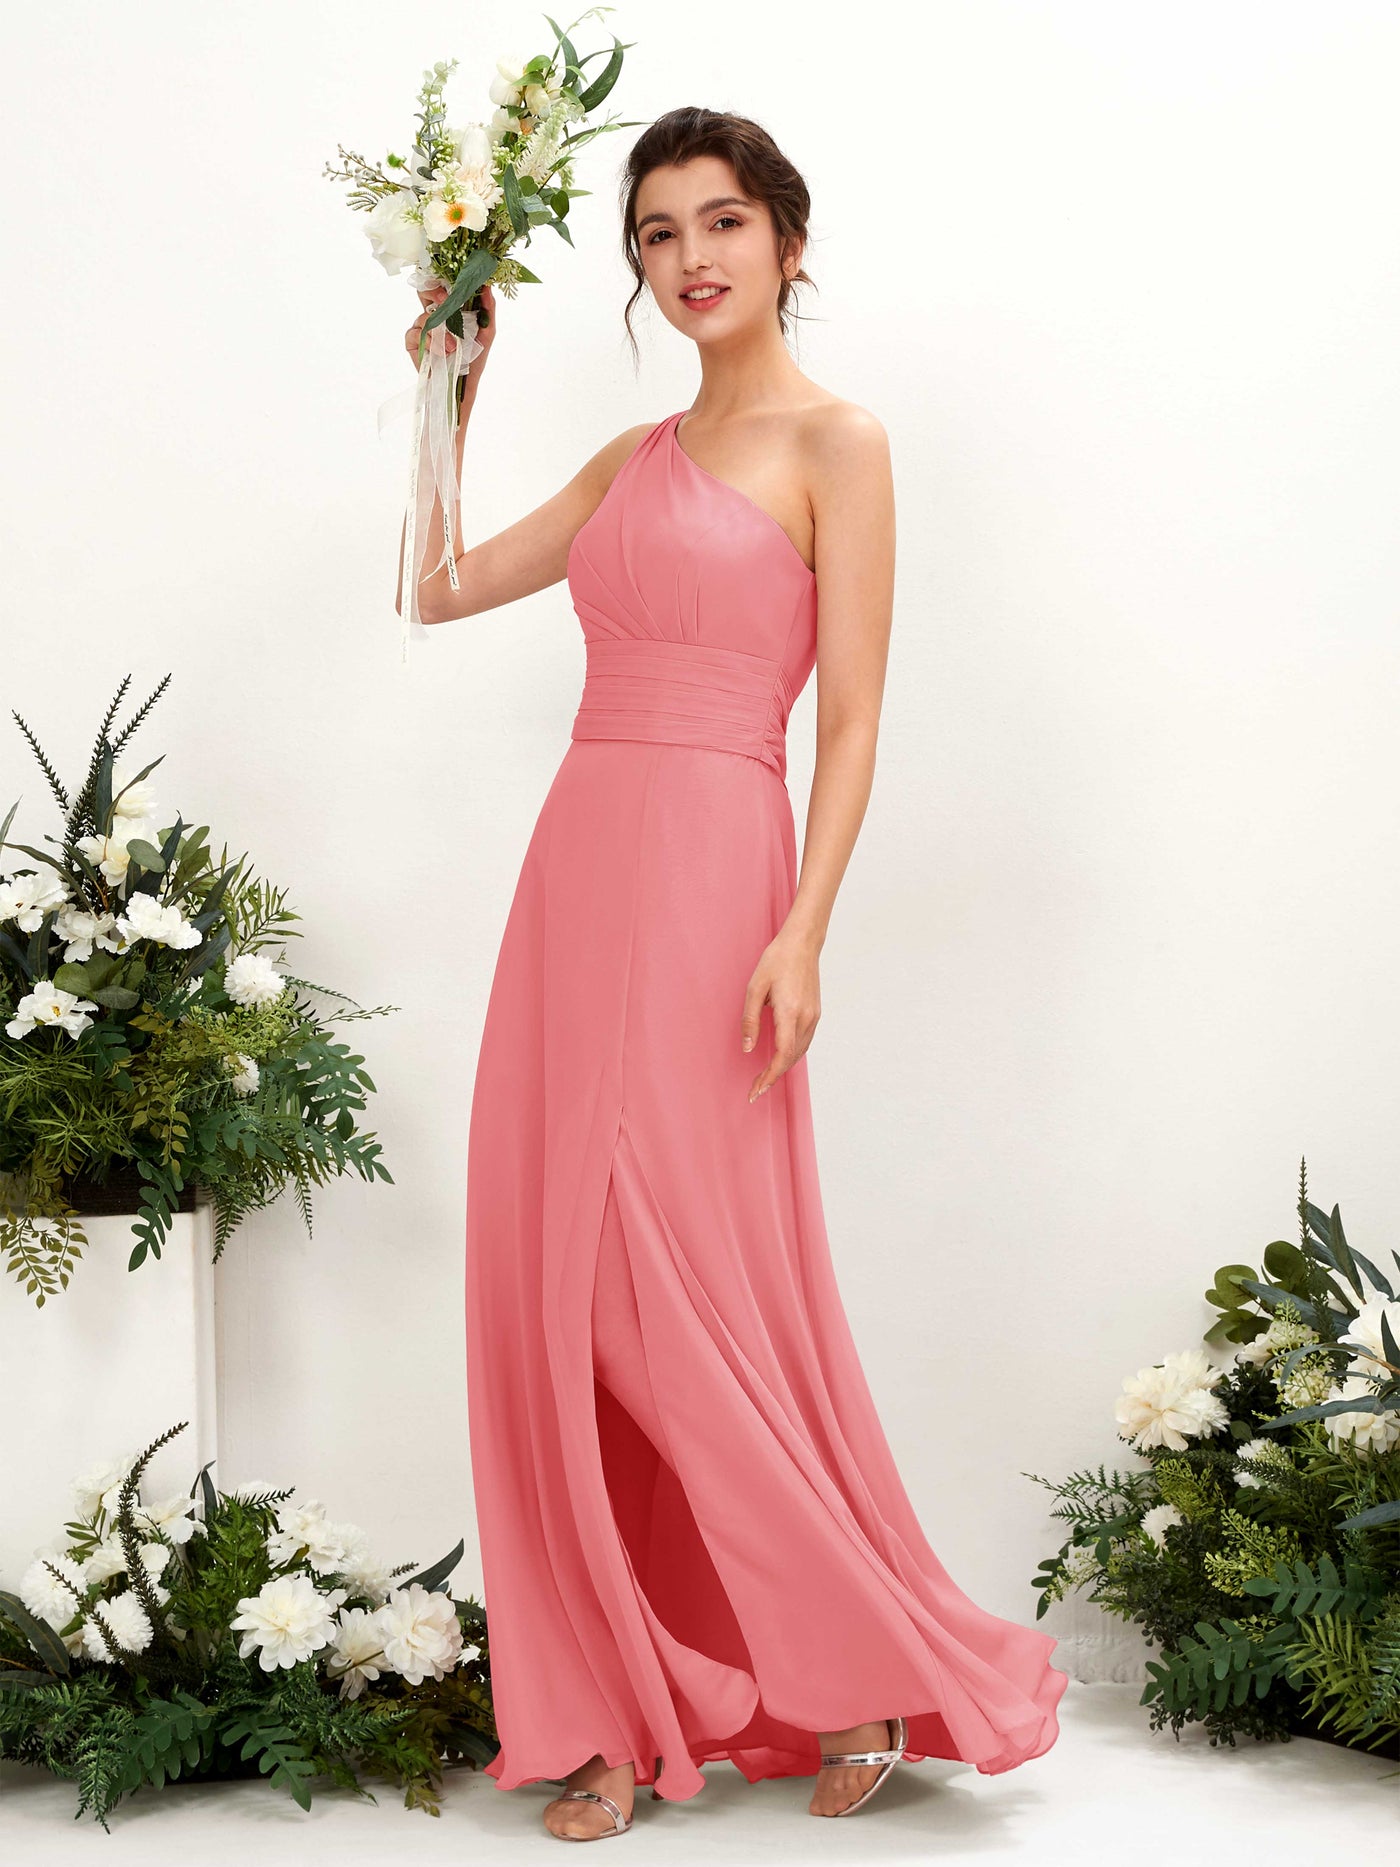 Coral Pink Bridesmaid Dresses Bridesmaid Dress A-line Chiffon One Shoulder Full Length Sleeveless Wedding Party Dress (81224730)#color_coral-pink